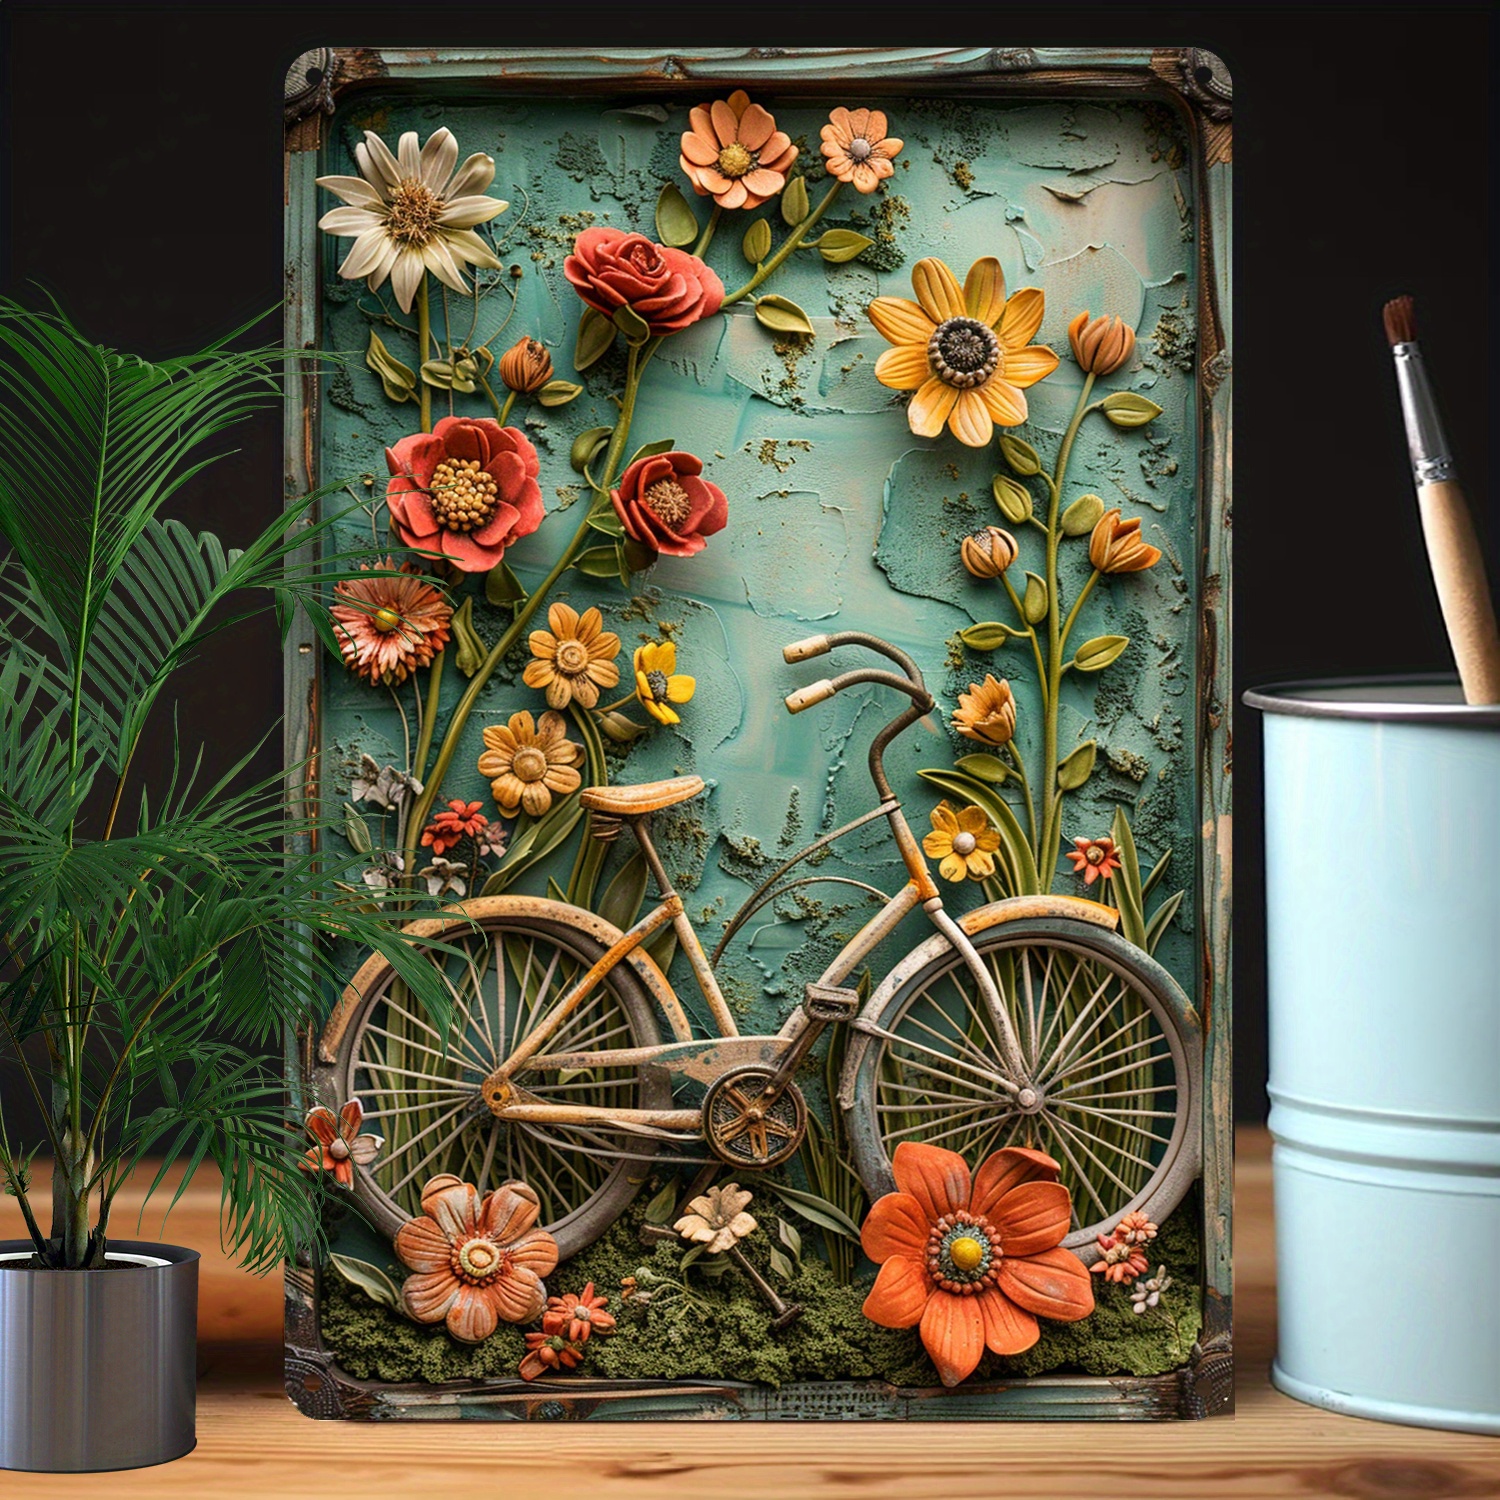 

Spring & Summer Vintage Bicycle With Flowers Aluminum Sign - 1pc, 8x12 Inch Metal Wall Art, Moisture Resistant, High Bend Resistance, Decorative 2d Relief For Home, Office, And Gifts A462